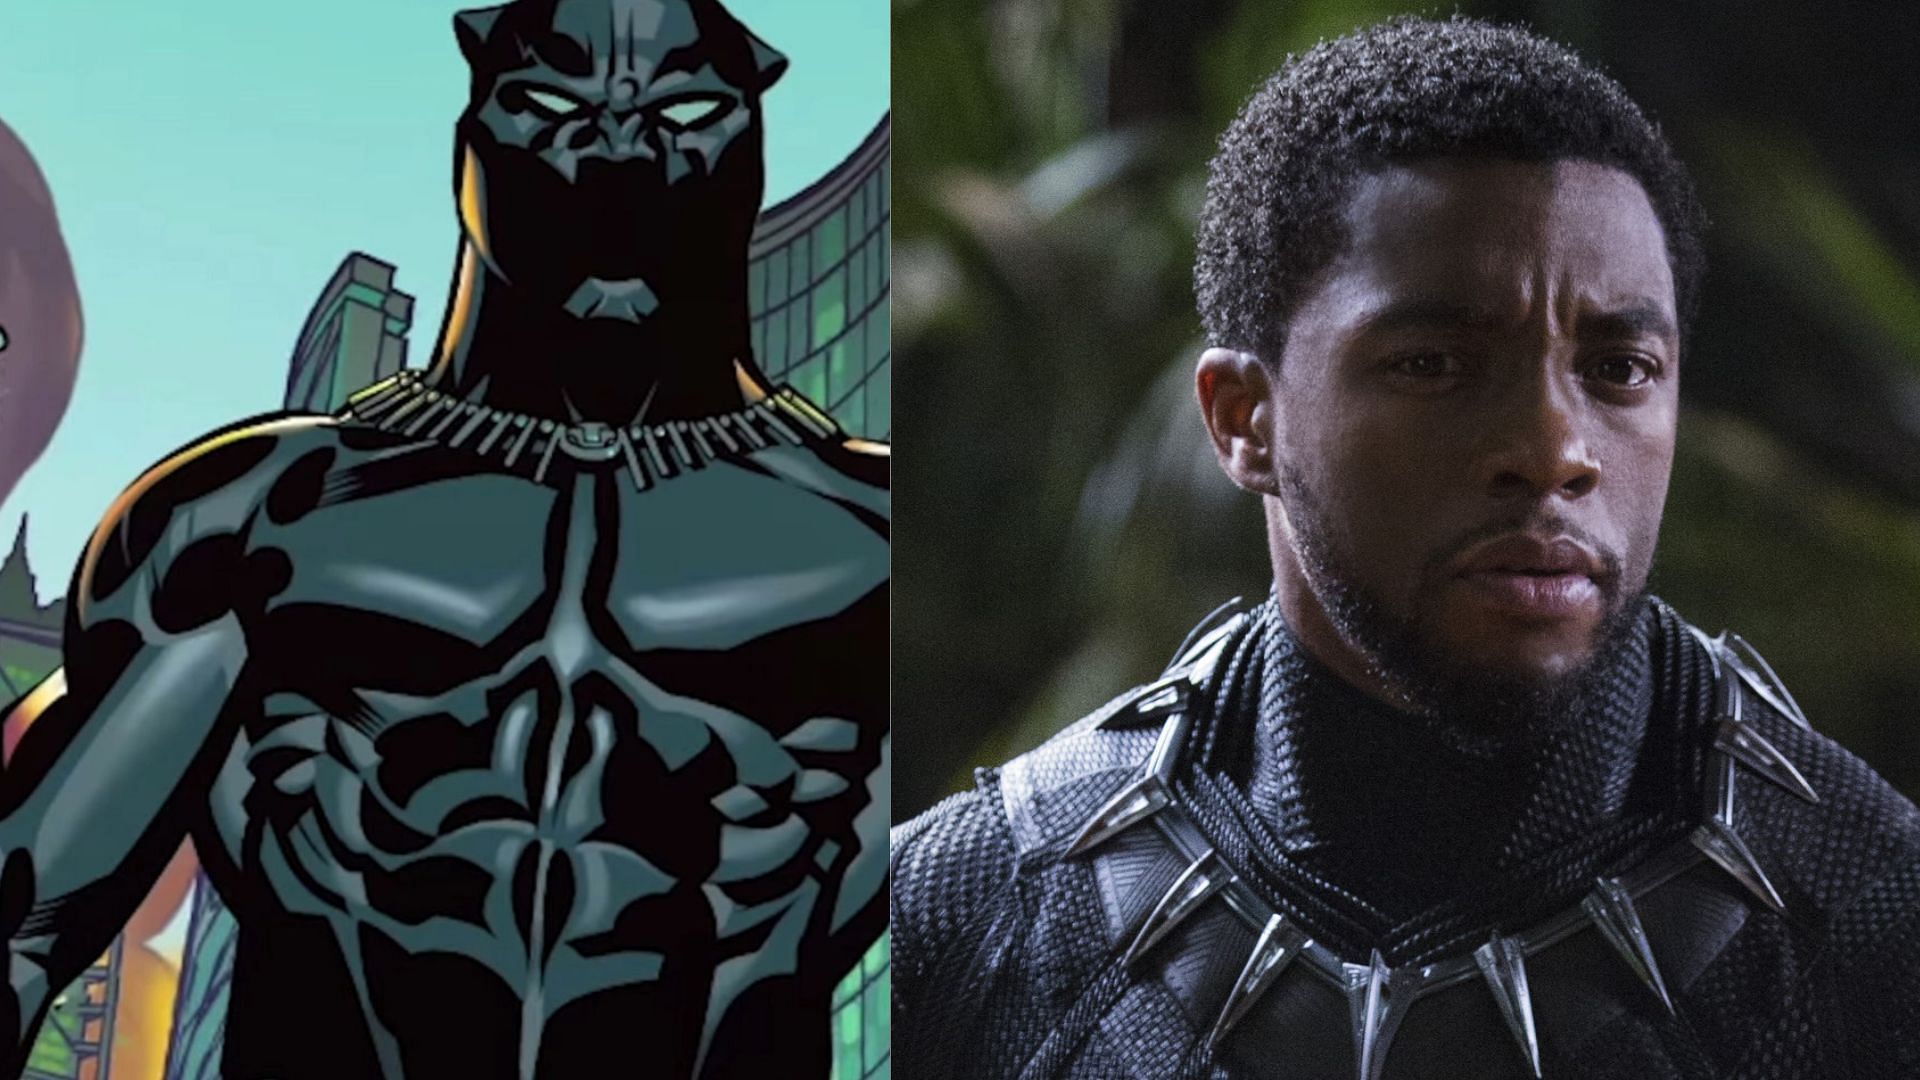 Left: Black Panther in comics, Right: Black Panther played by Chadwick Boseman in the MCU (Images via Marvel)